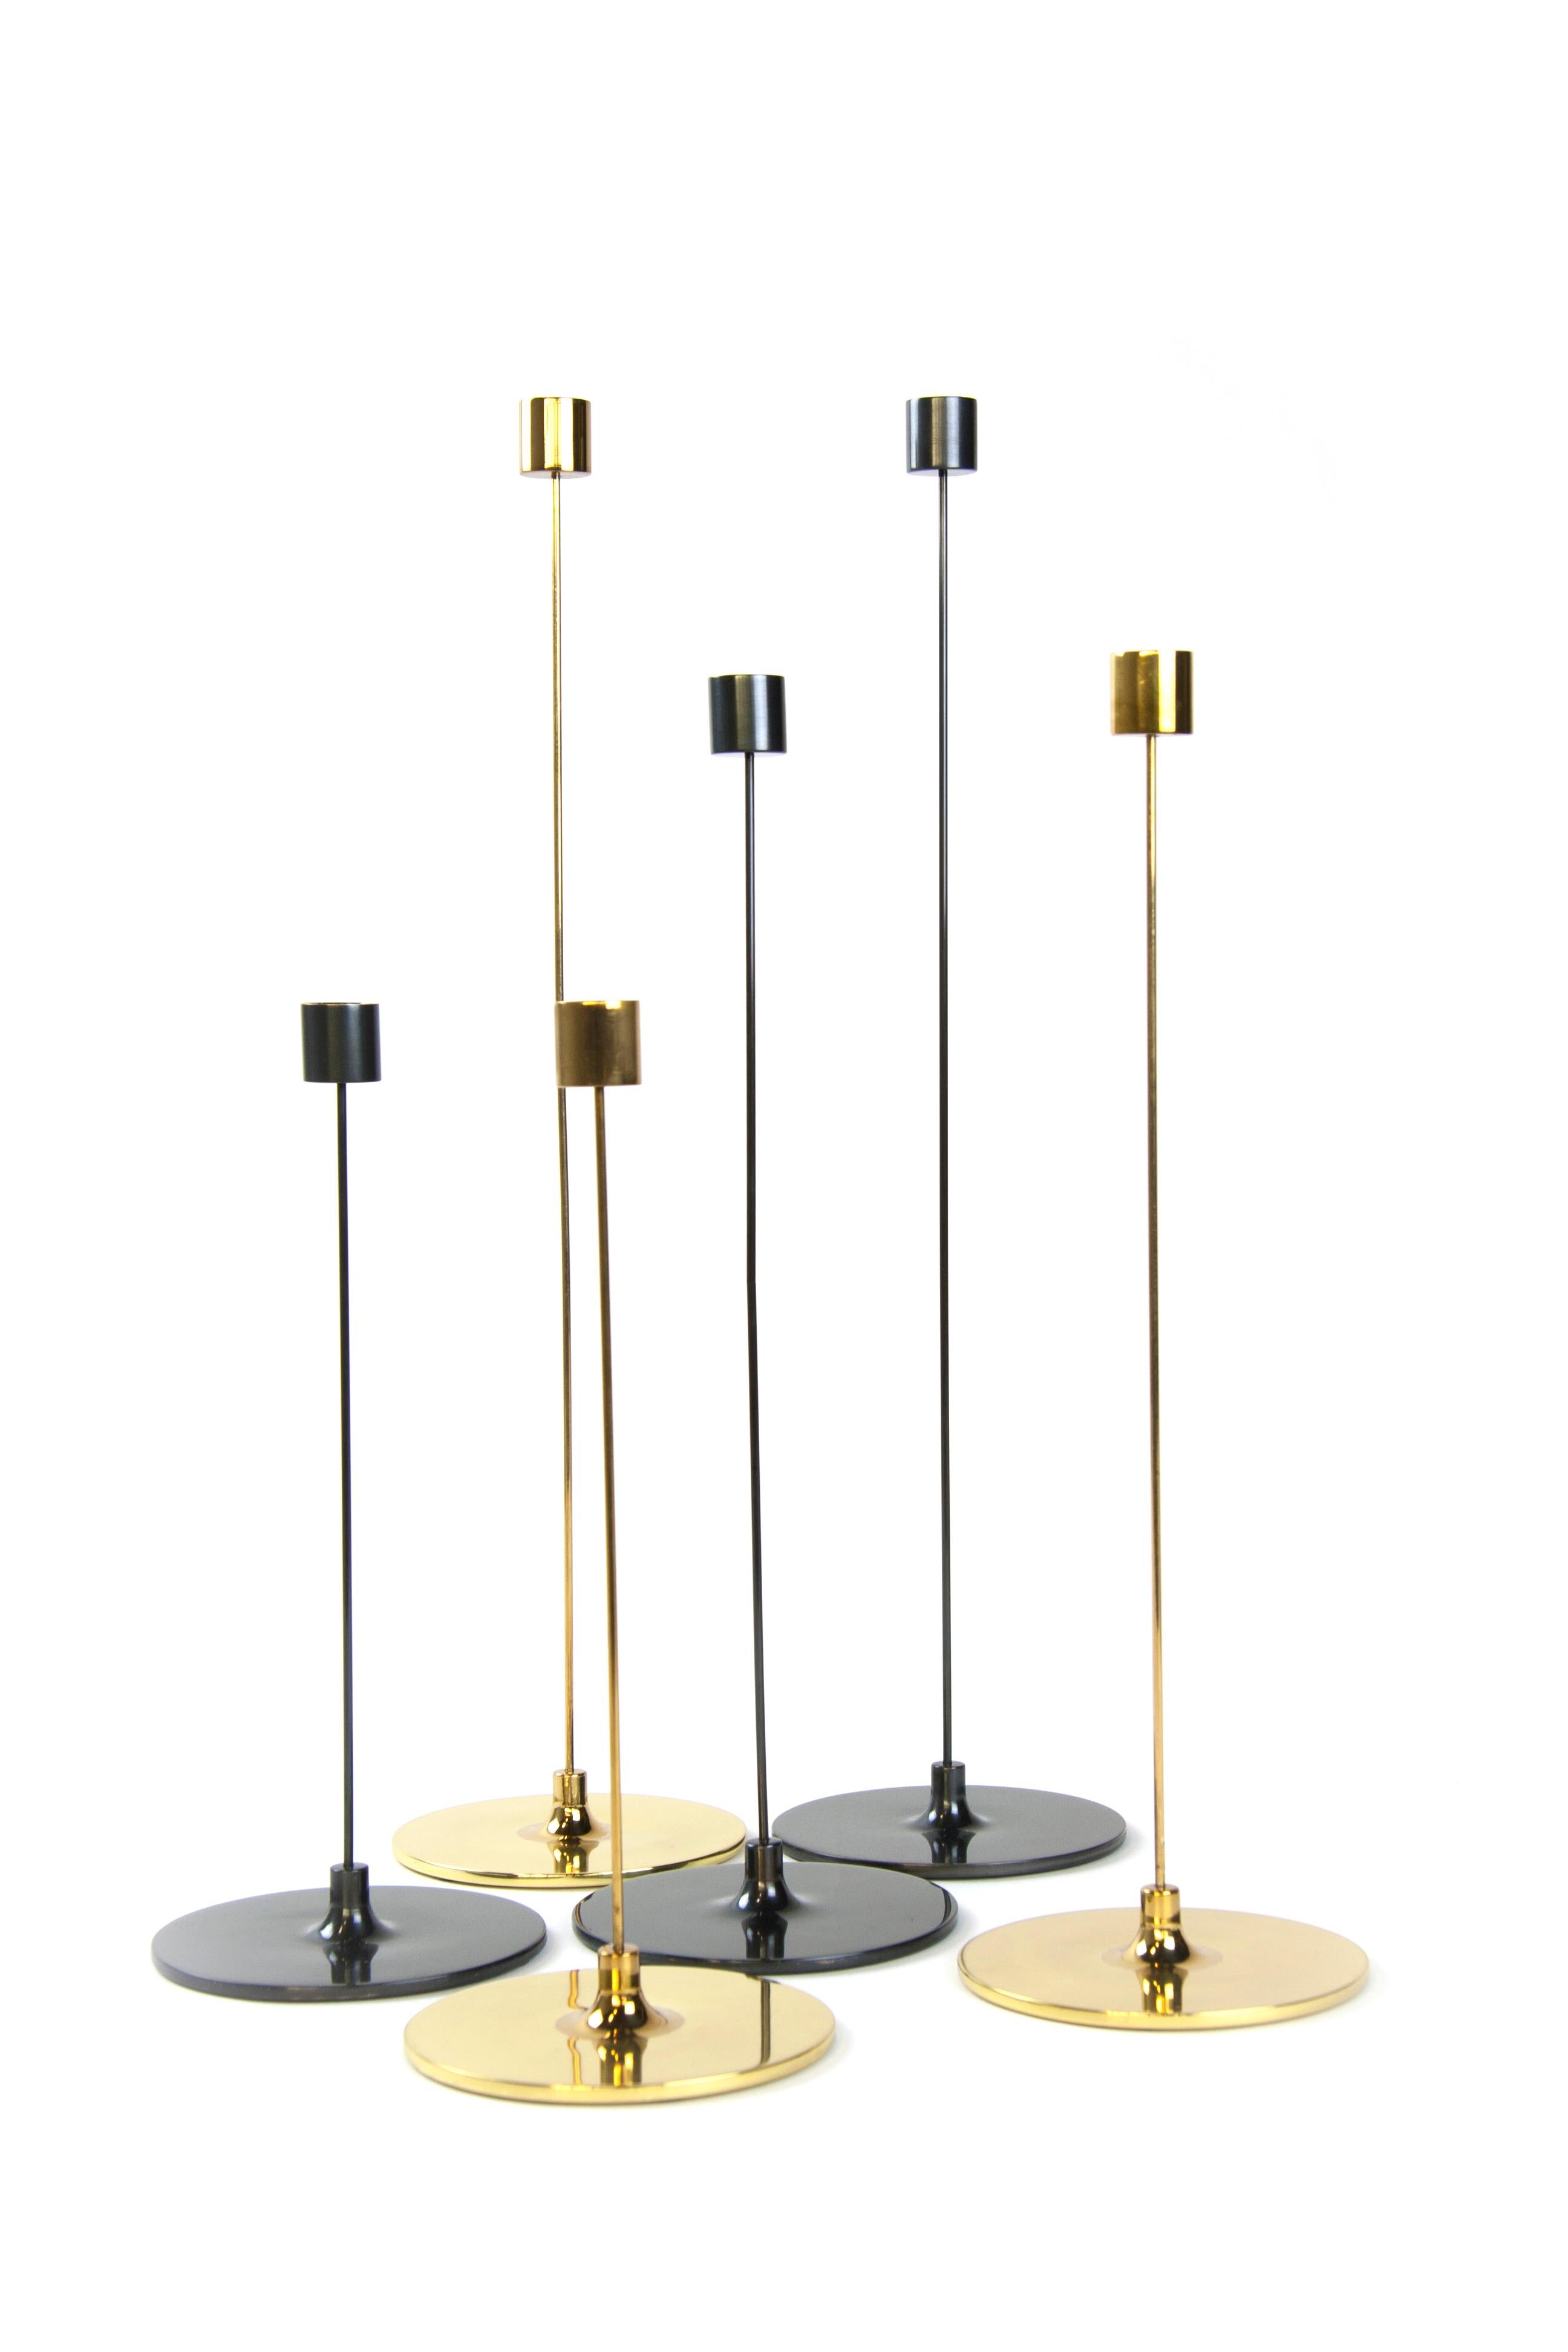 Large Pin darkened brass candlestick by Gentner Design
Dimensions: D 12.7 x H 50.8 cm
Materials: darkened brass
Available in polished tarnished brass and darkened brass.
Available in small, medium and large.

With an 12”, 16”, or 20” height, the